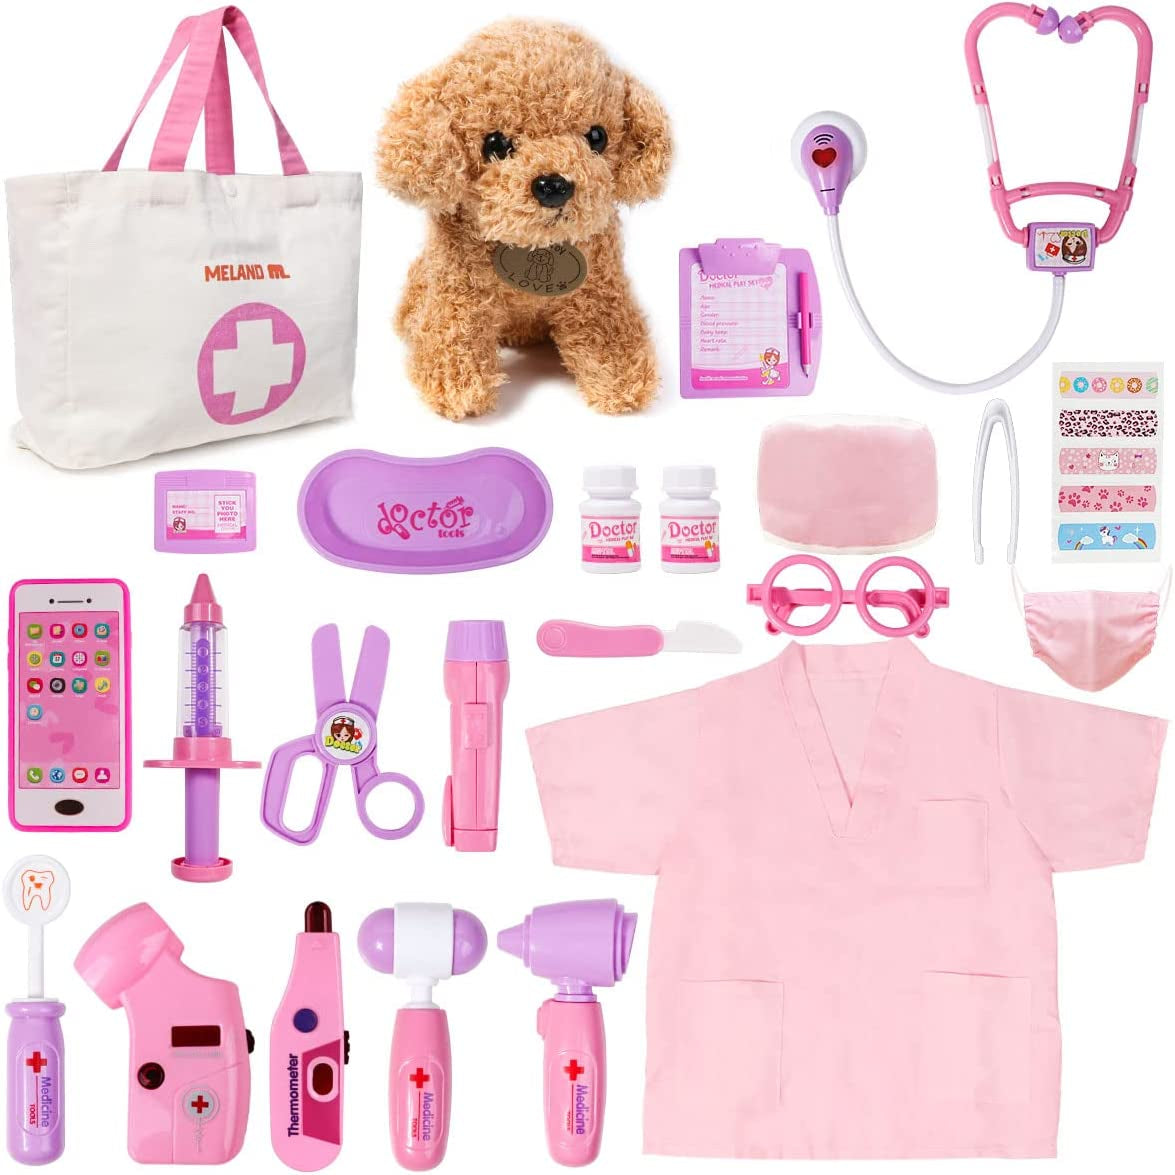 Pretend Play Doctor Set for Girls - Comprehensive Toy Doctor Kit with Dog Toy, Portable Bag, Electronic Stethoscope & Dress up Costume